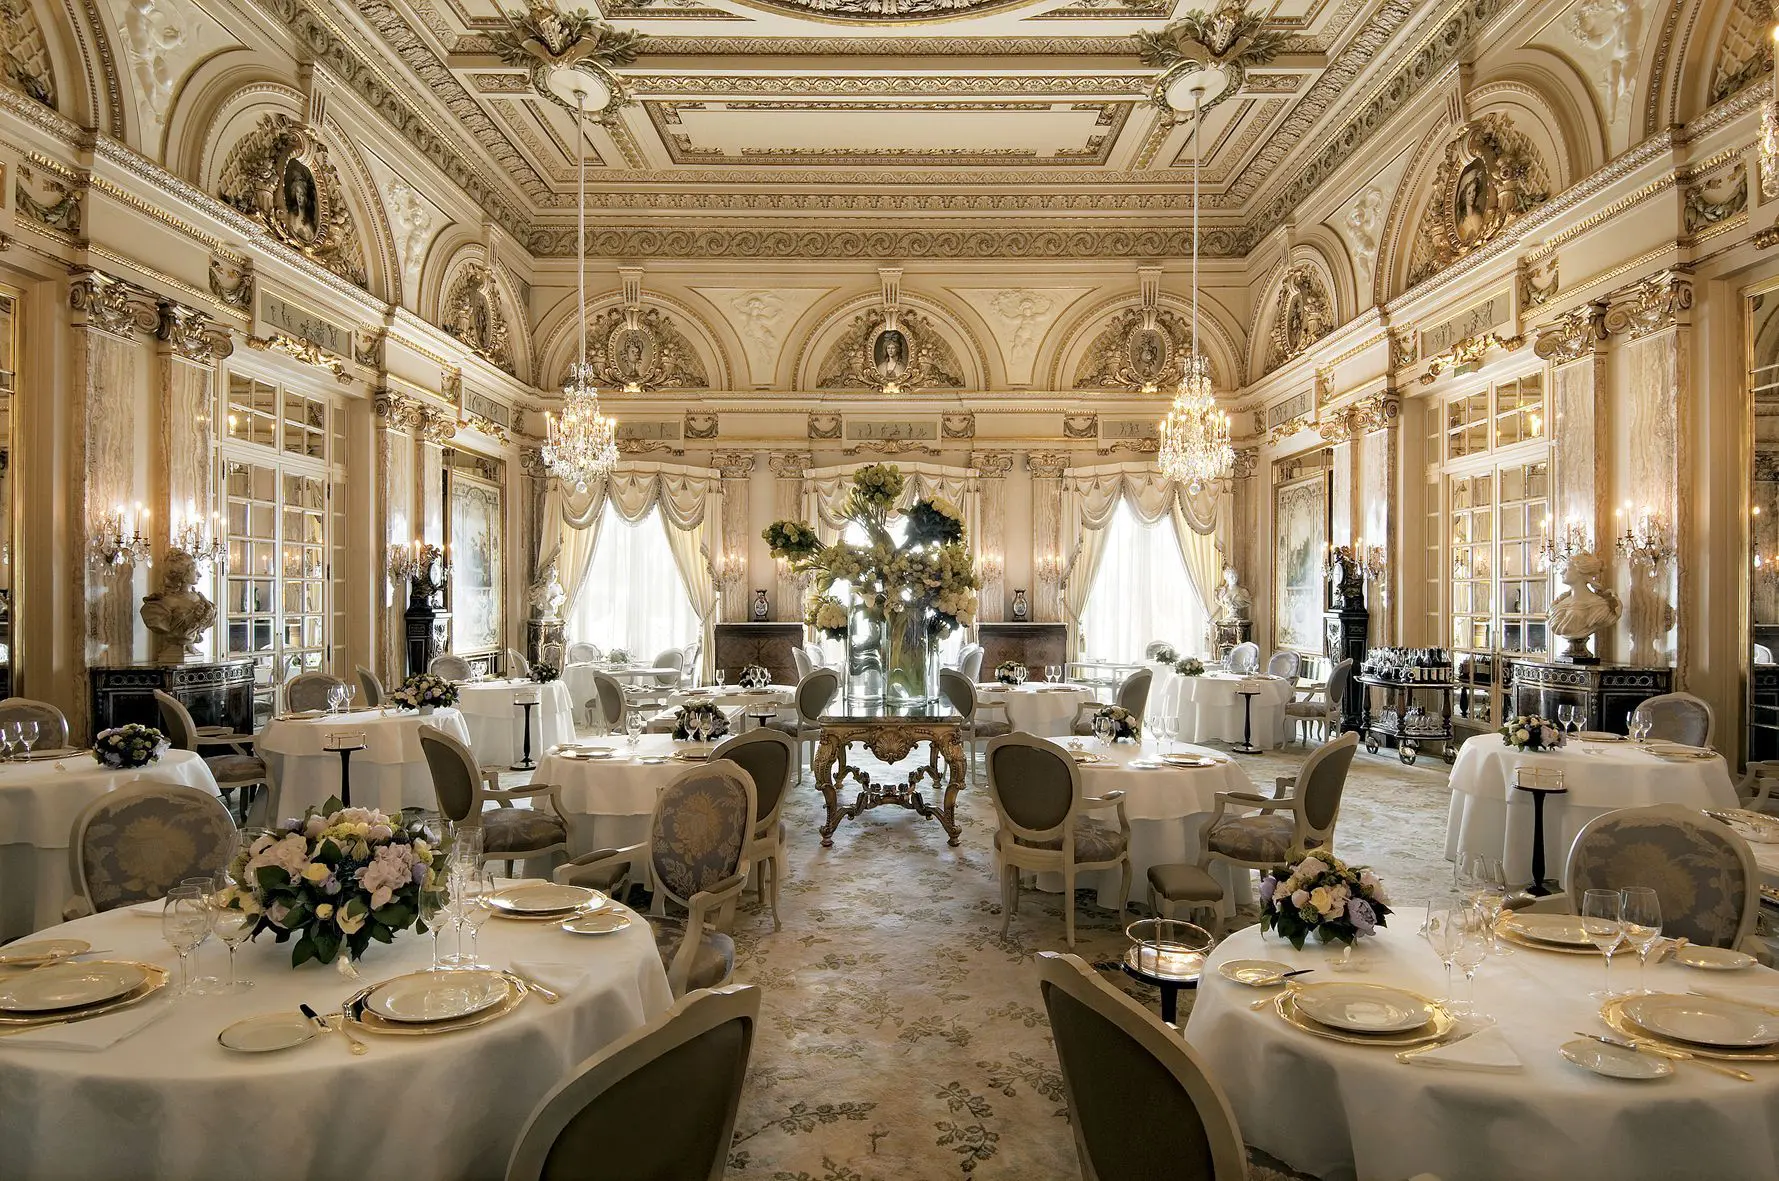 Image of the luxurious dining area in the Hotel de Paris Monte-Carlo with tables laid for service